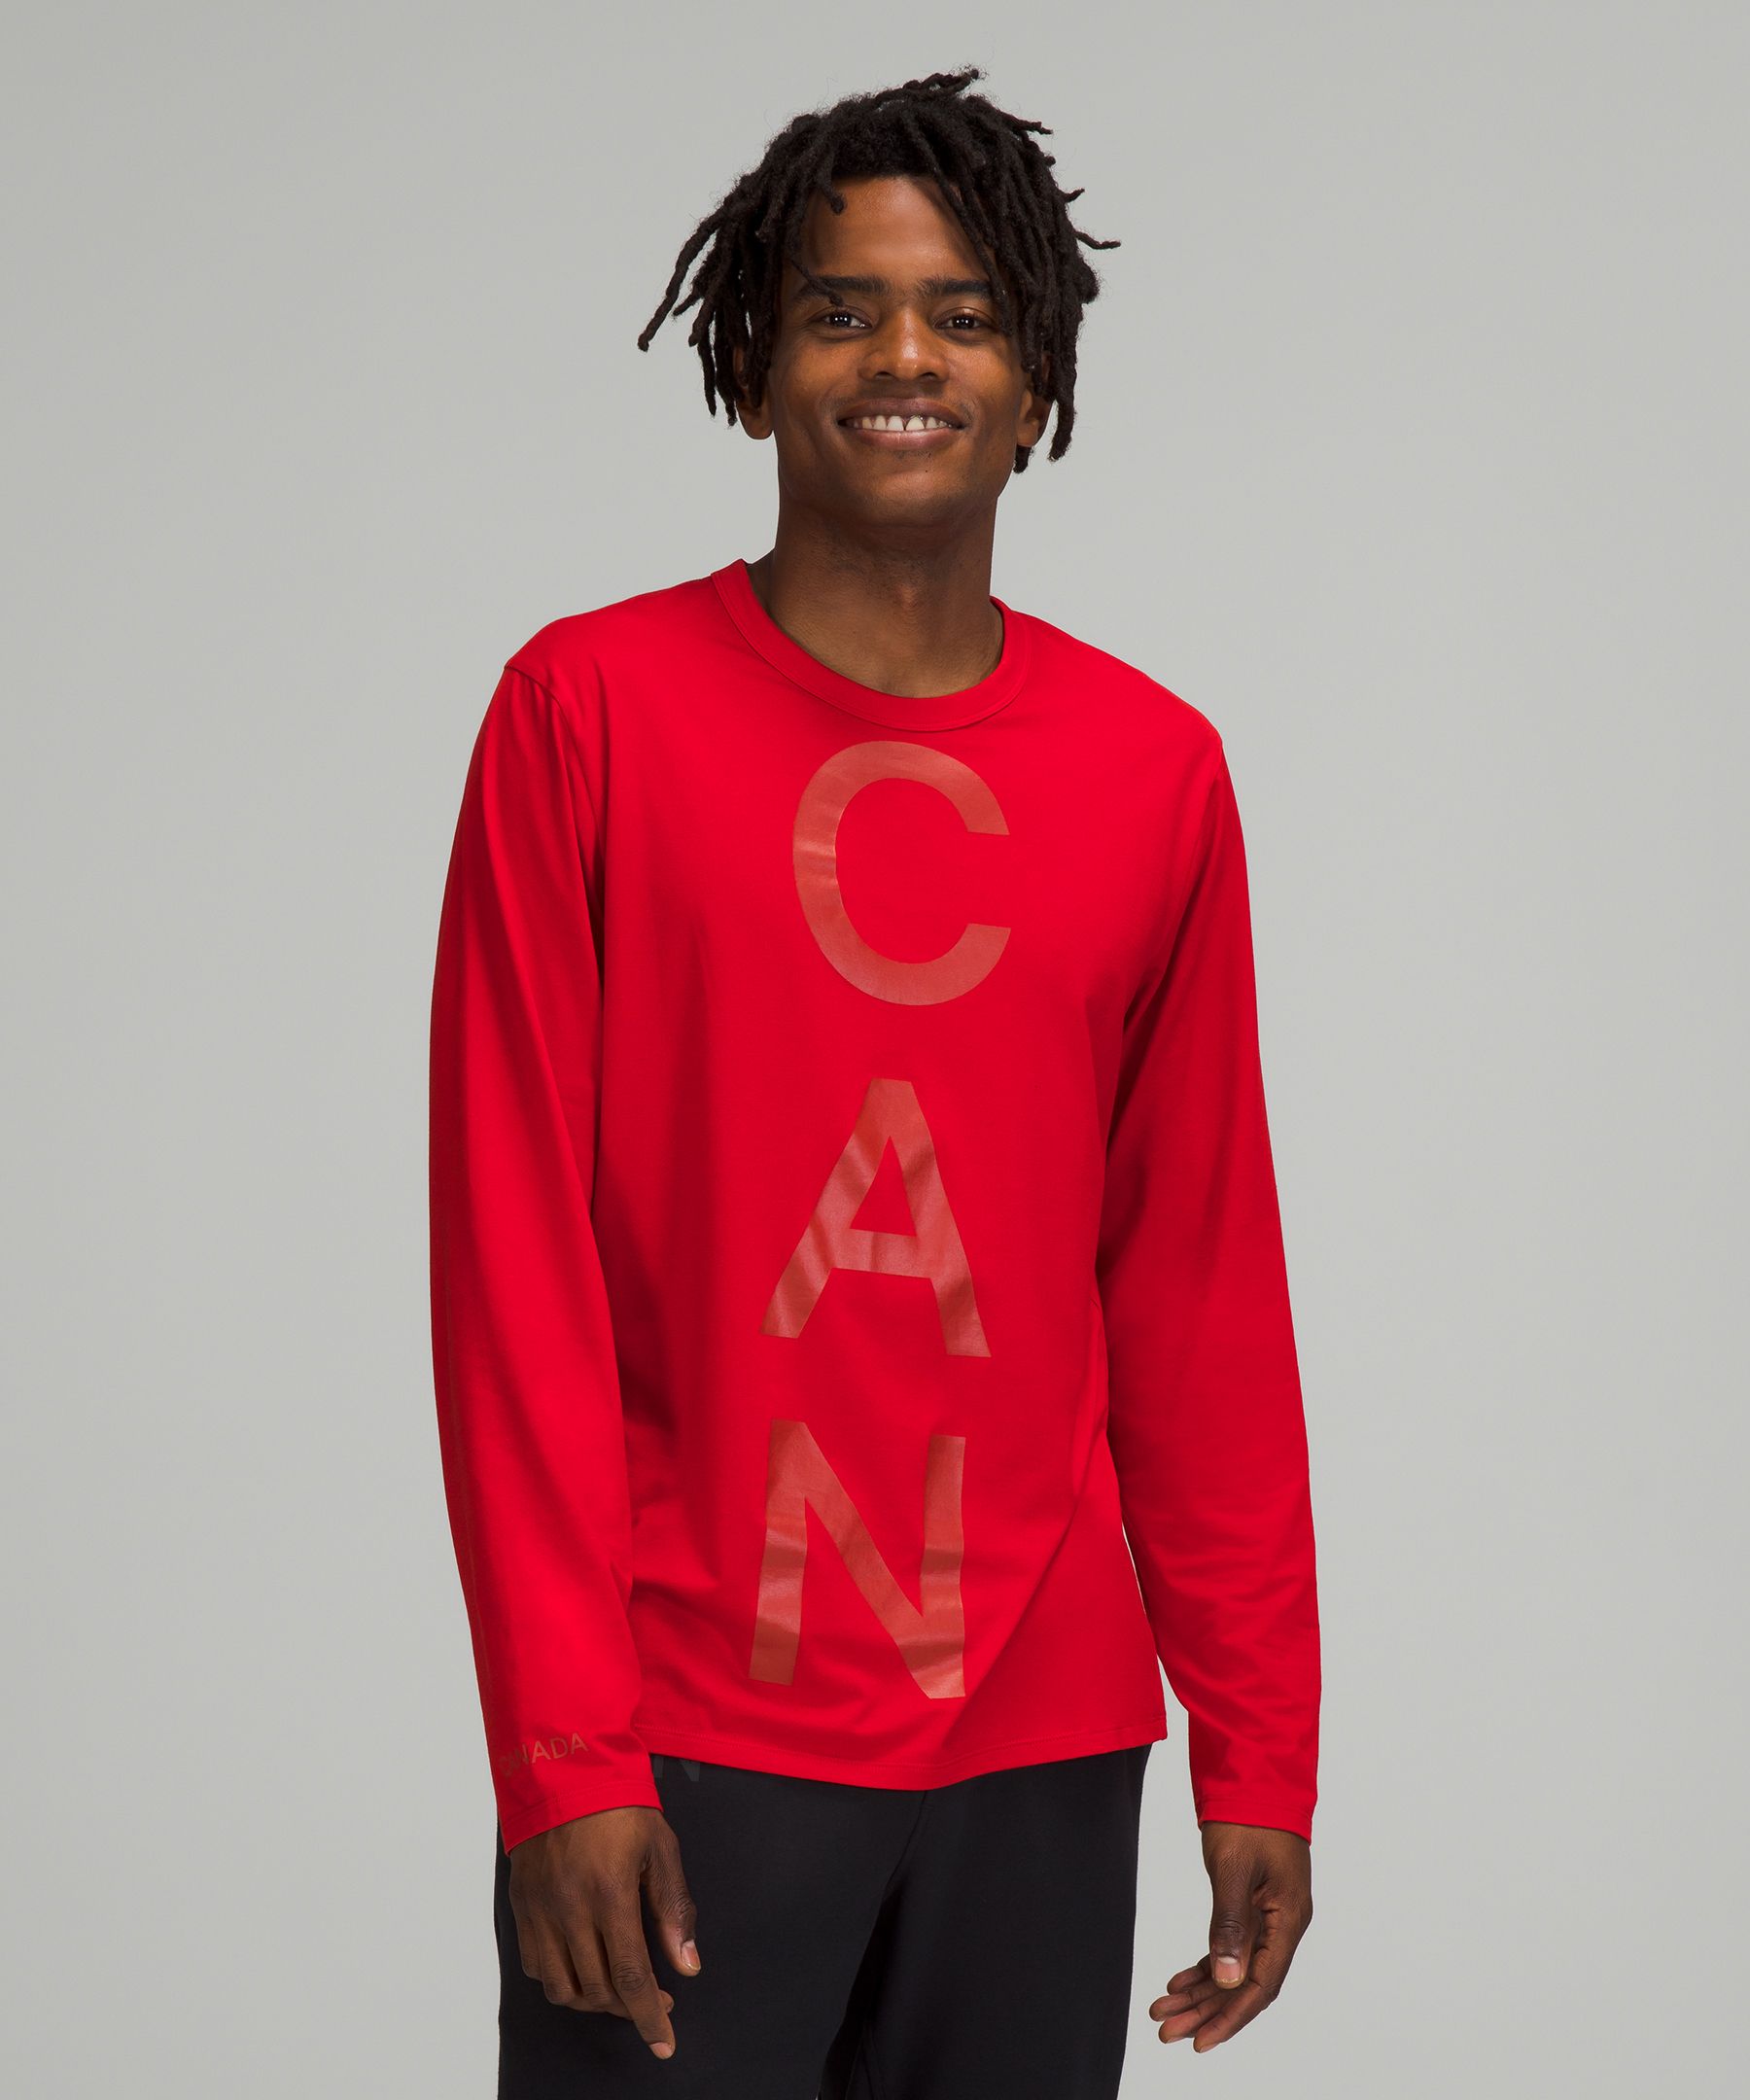 Lululemon Canada We Made Too Much Sales: Classic-Fit Cotton-Blend T-Shirt  for $29 + FREE Shipping! - Canadian Freebies, Coupons, Deals, Bargains,  Flyers, Contests Canada Canadian Freebies, Coupons, Deals, Bargains,  Flyers, Contests Canada